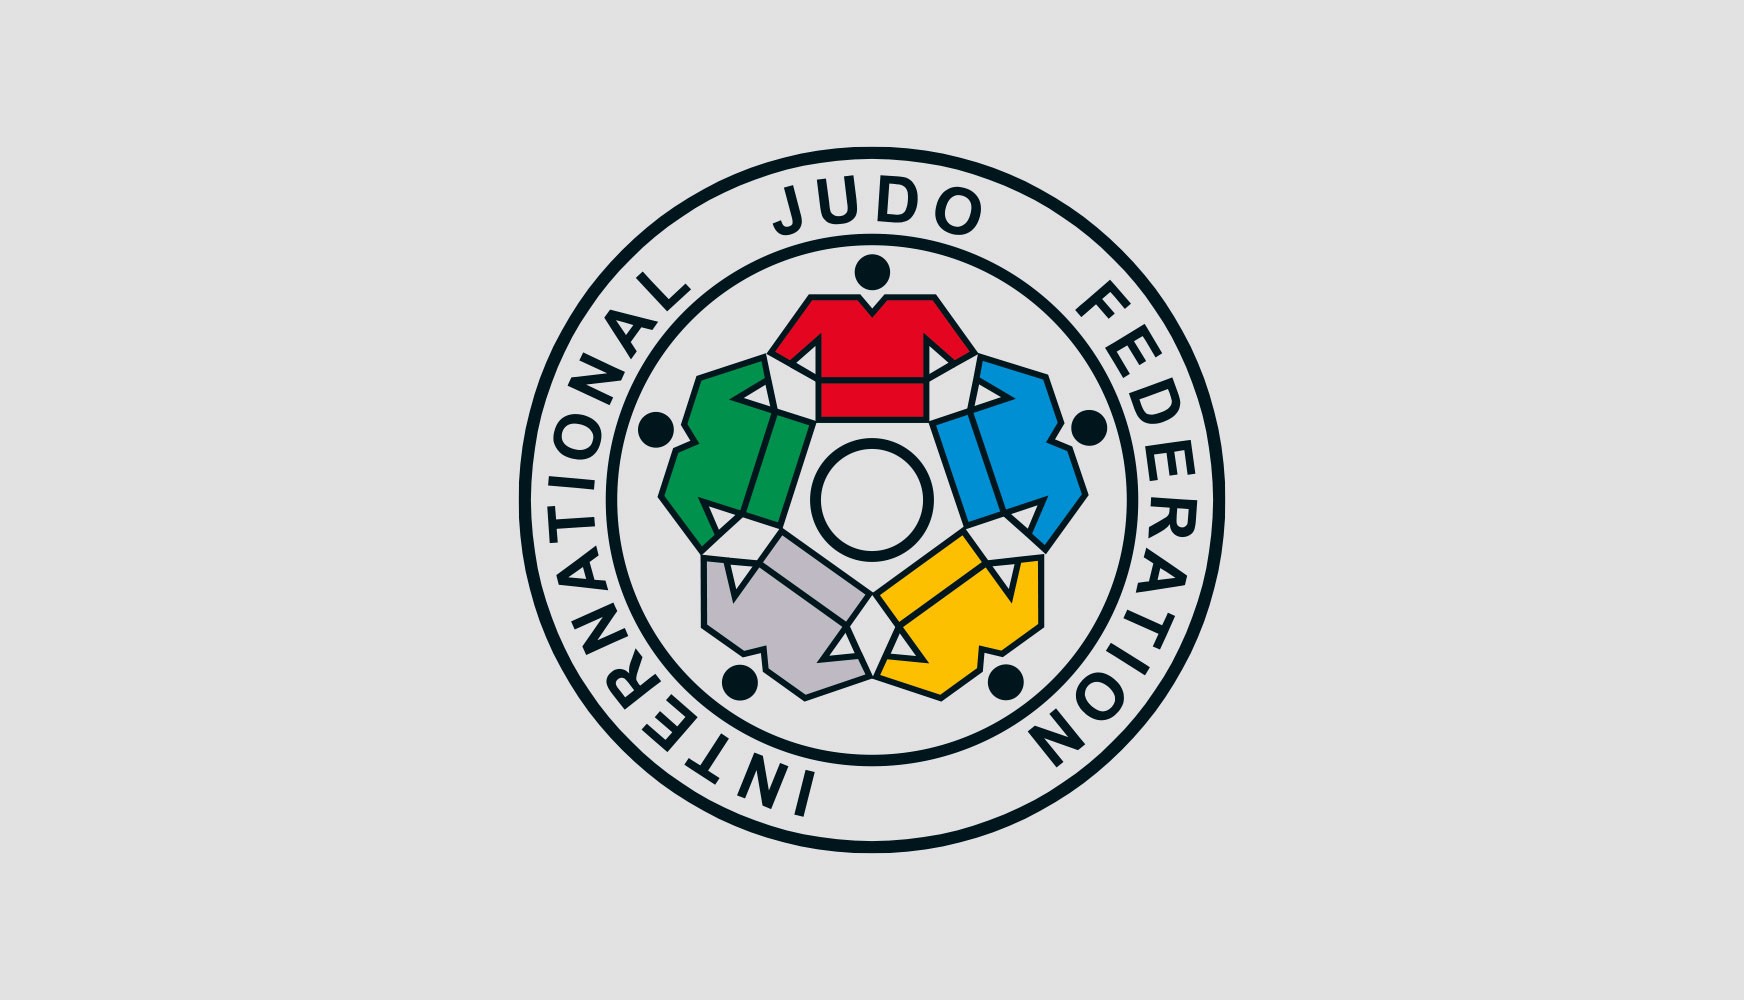 Official information about IJF events /